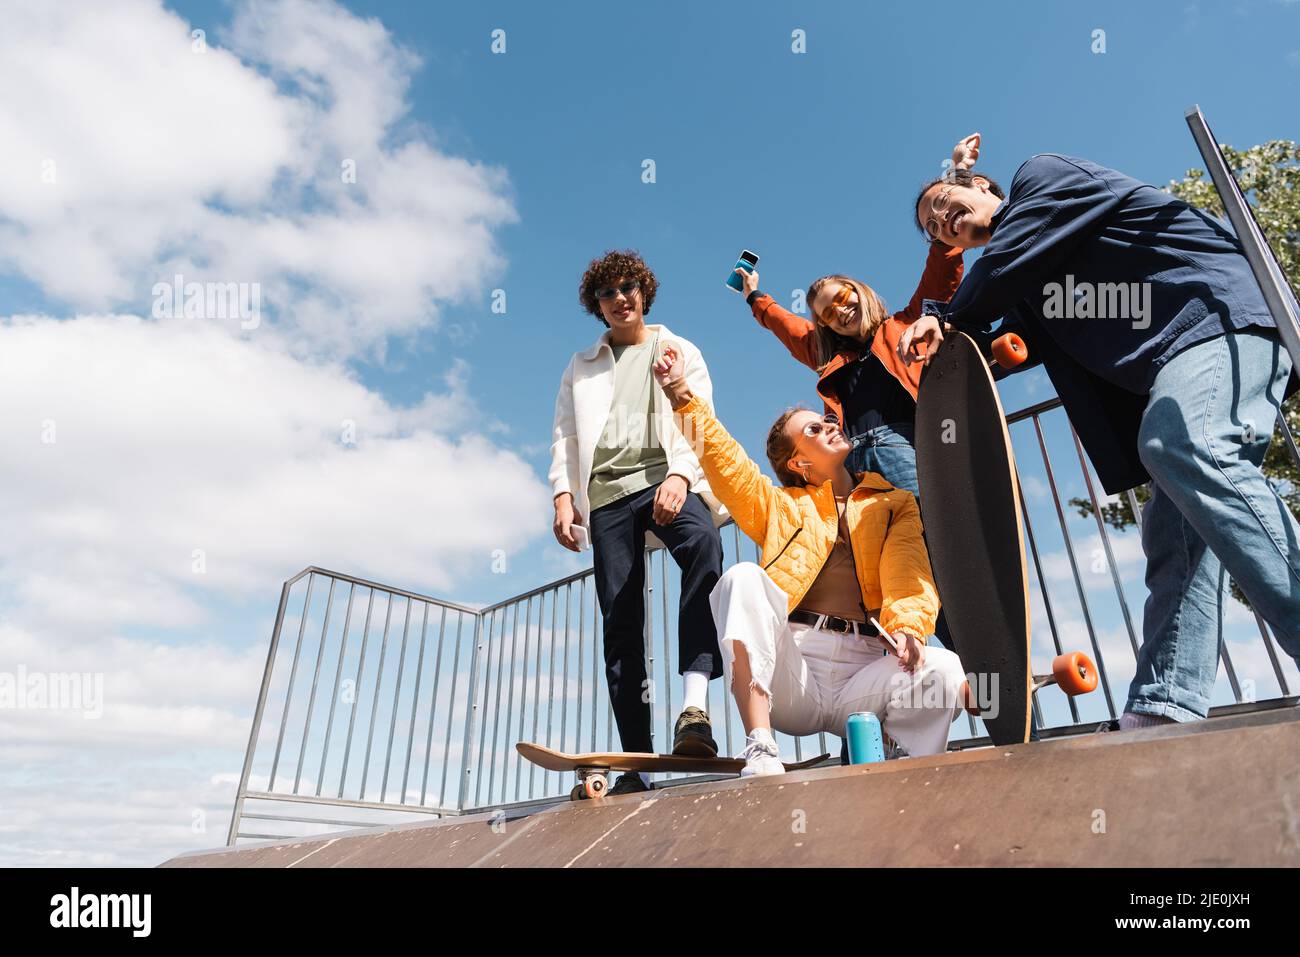 low angle view of cheerful multiethnic friends on skate ramp against blue cloudy sky Stock Photo